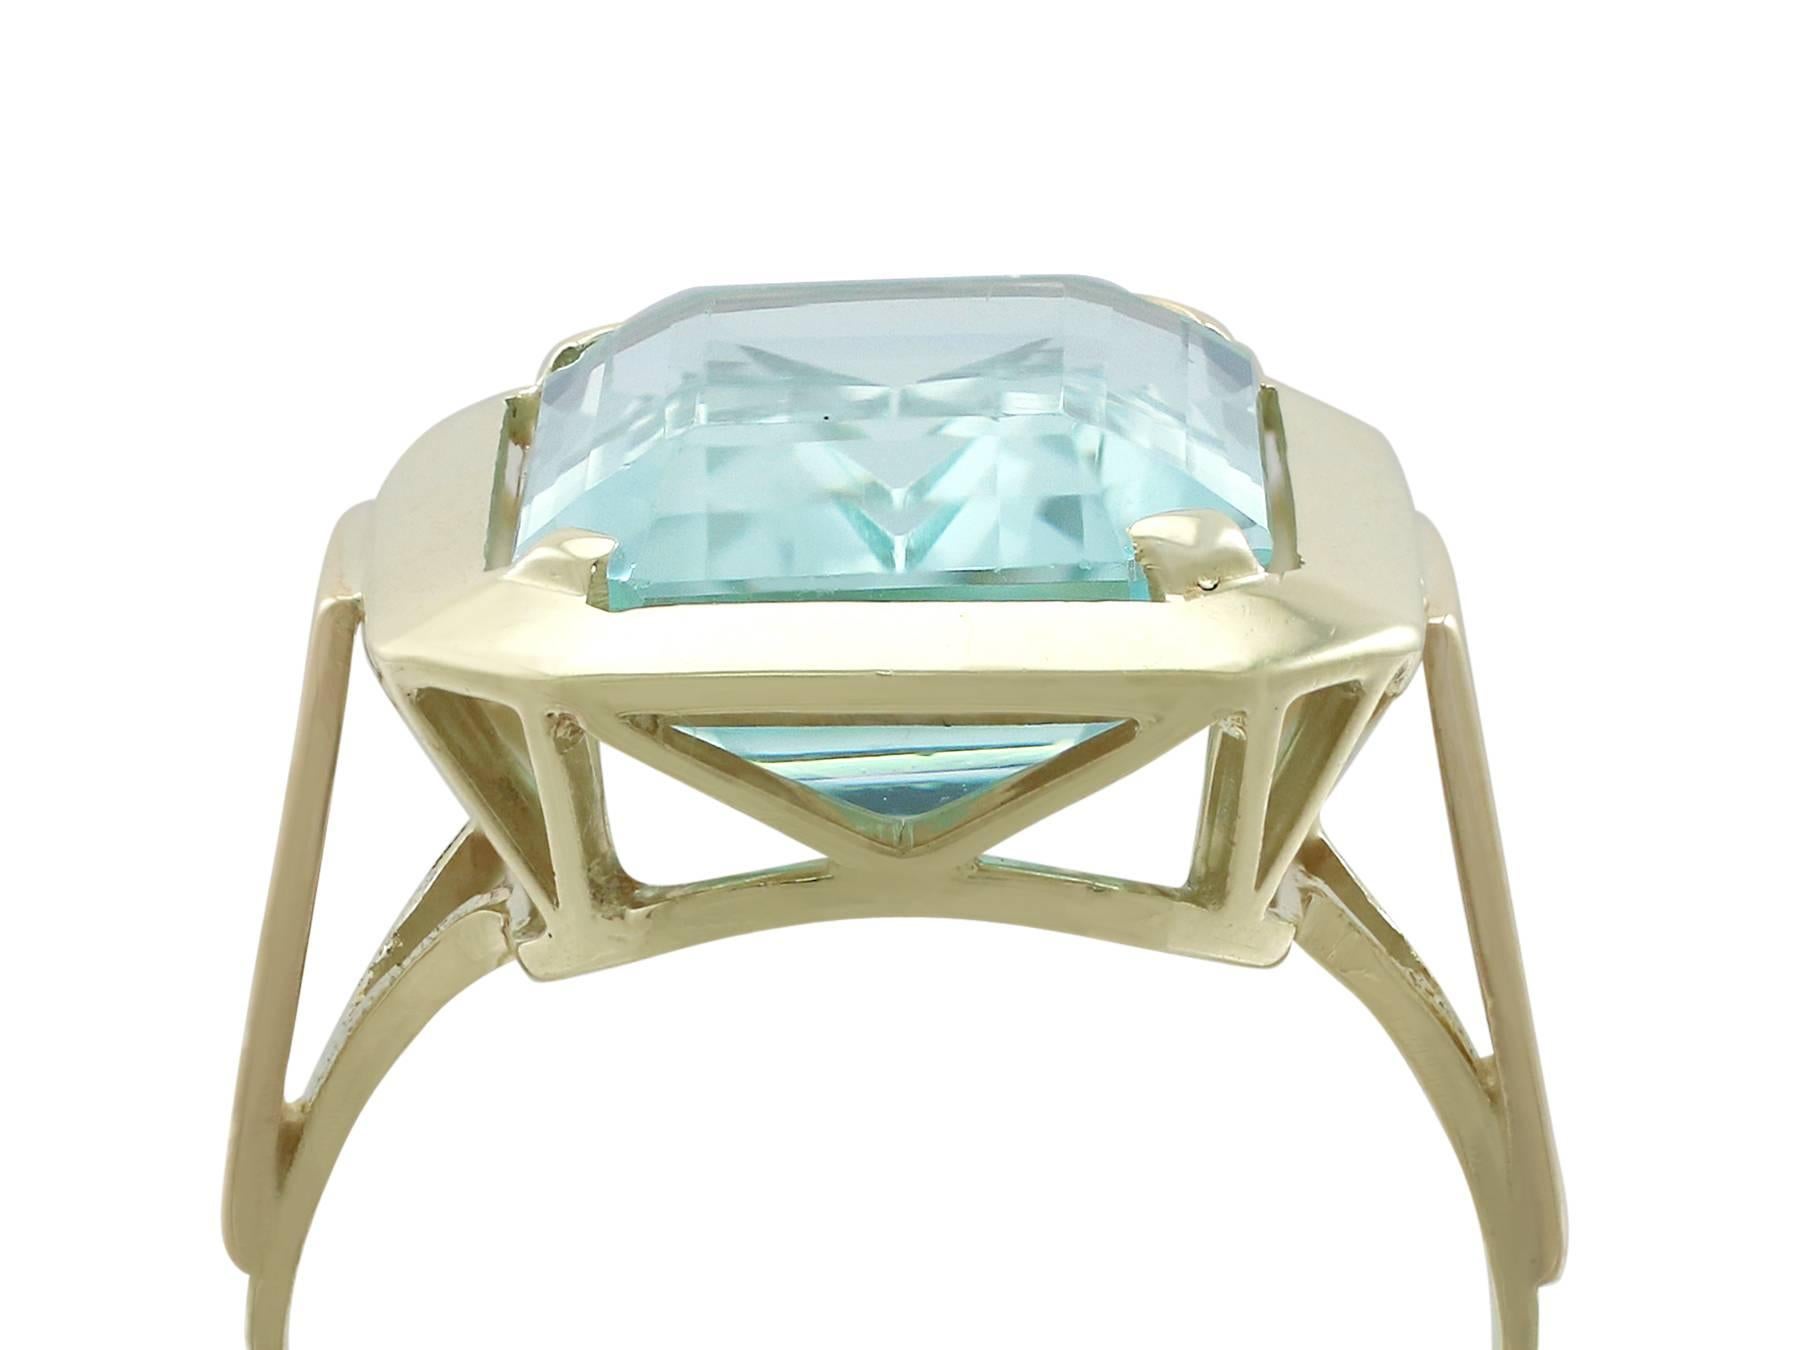 An impressive vintage European 9.06 carat aquamarine and 14 carat yellow gold cocktail ring; part of our diverse antique jewellery and estate jewelry collections.

This fine and impressive vintage aquamarine ring has been crafted in 14 ct yellow